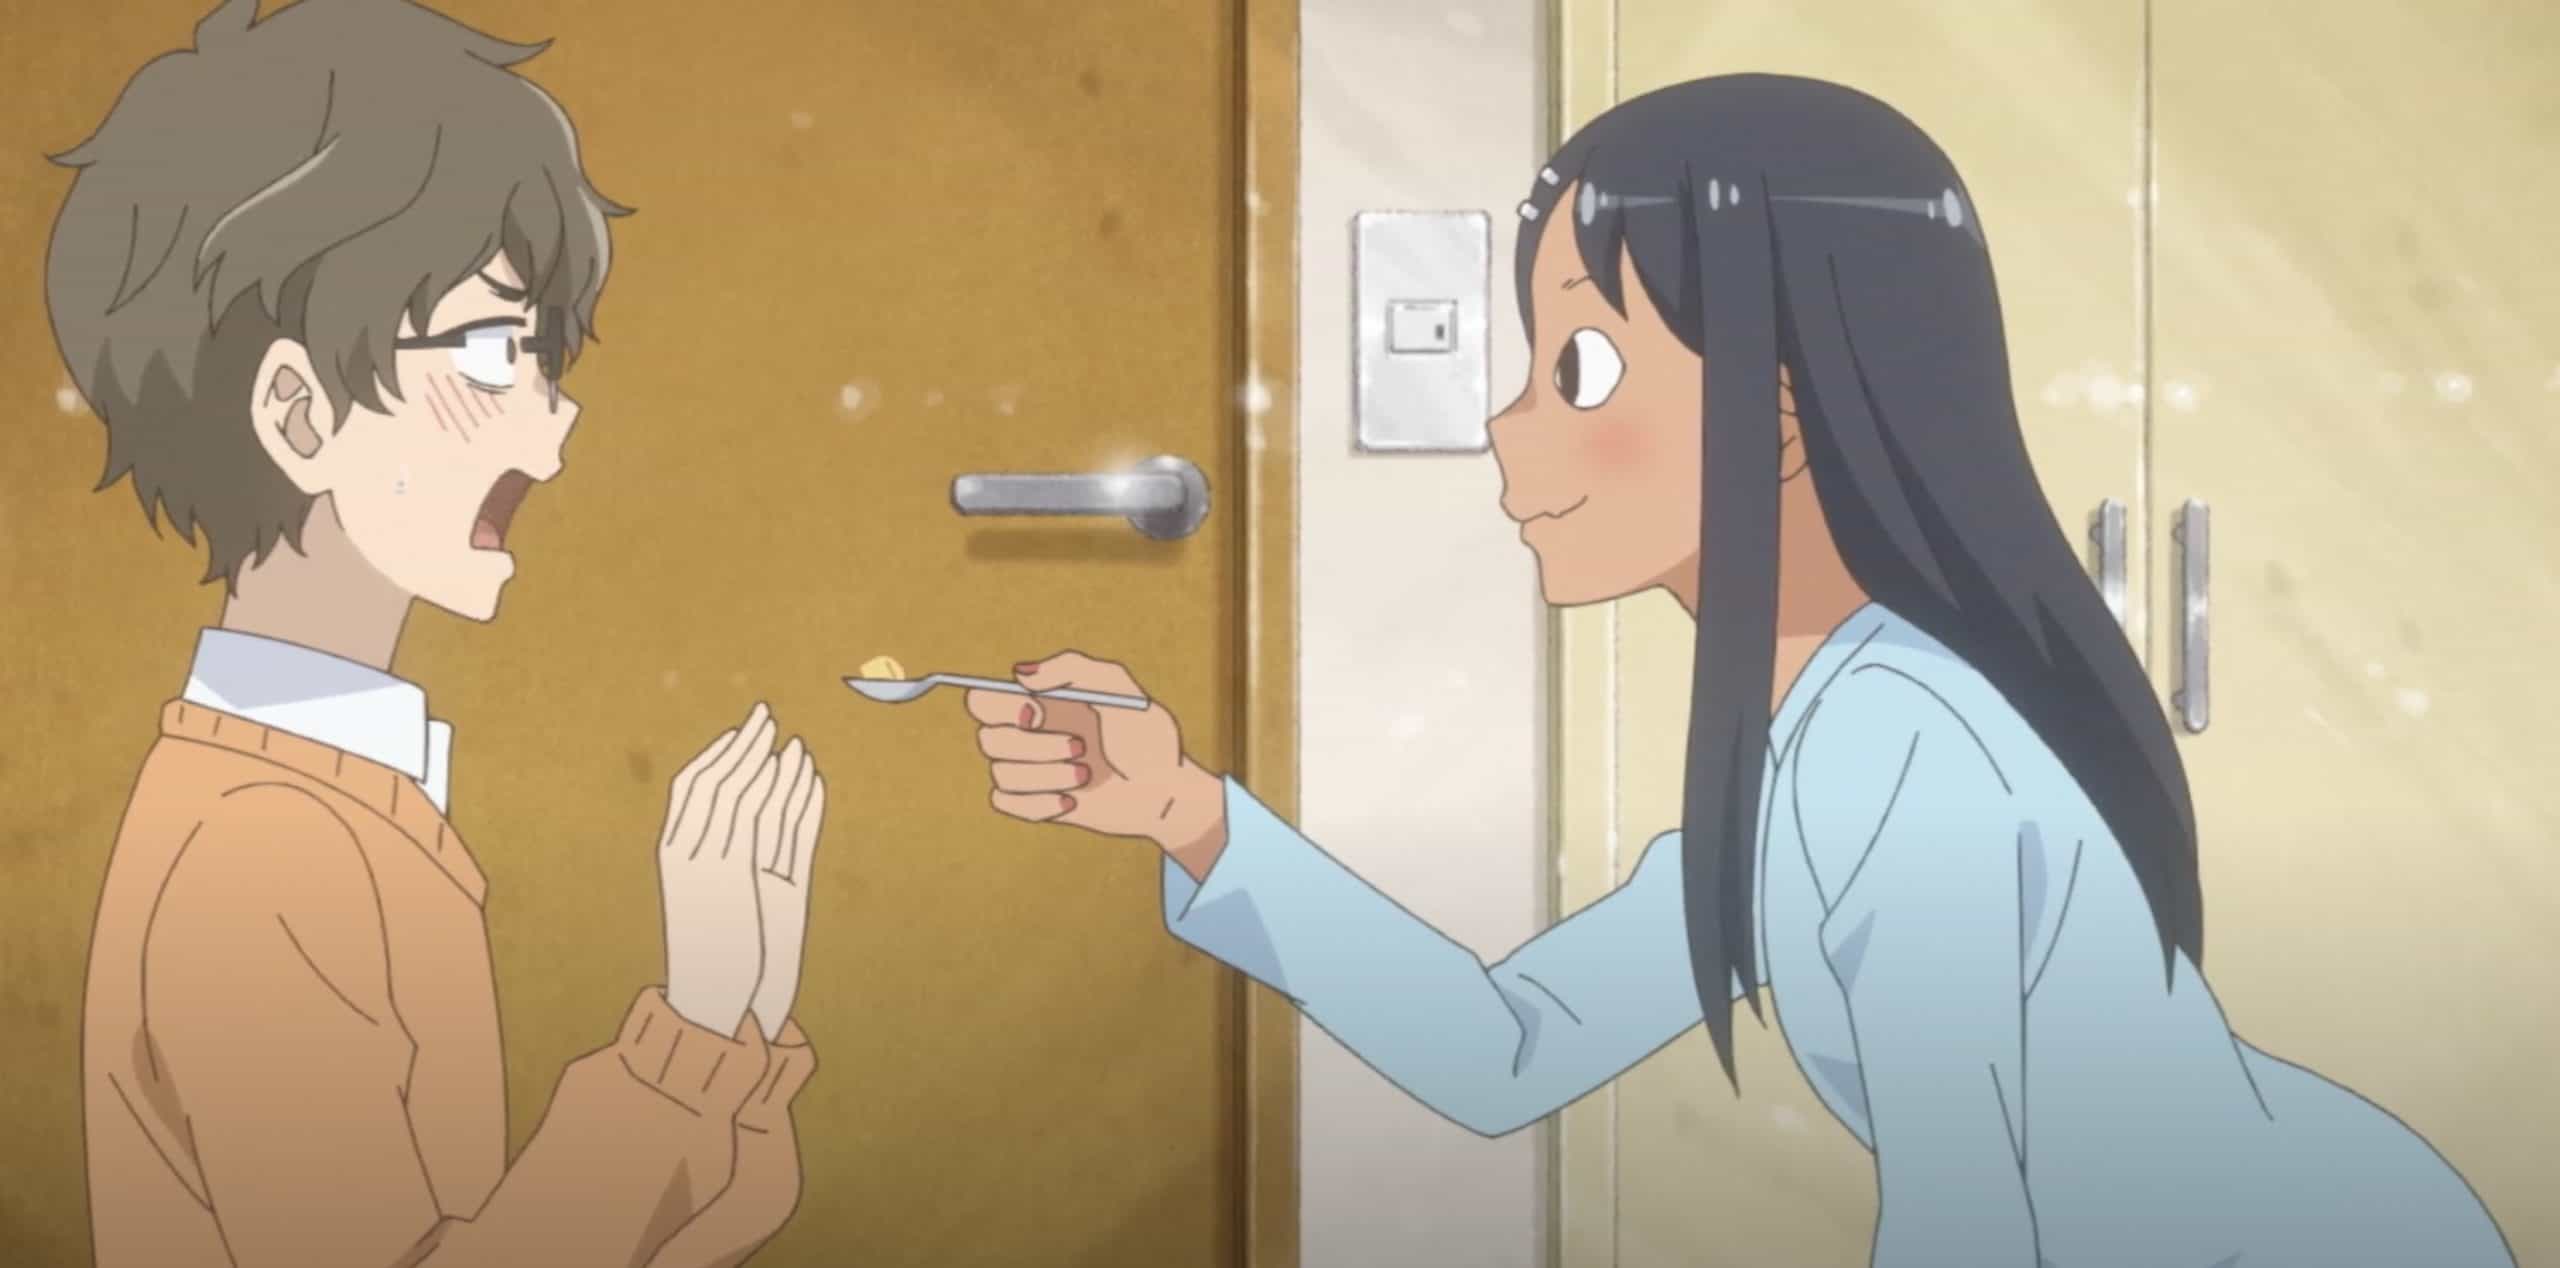 Watch Don't Toy With Me, Miss Nagatoro season 2 episode 1 streaming online